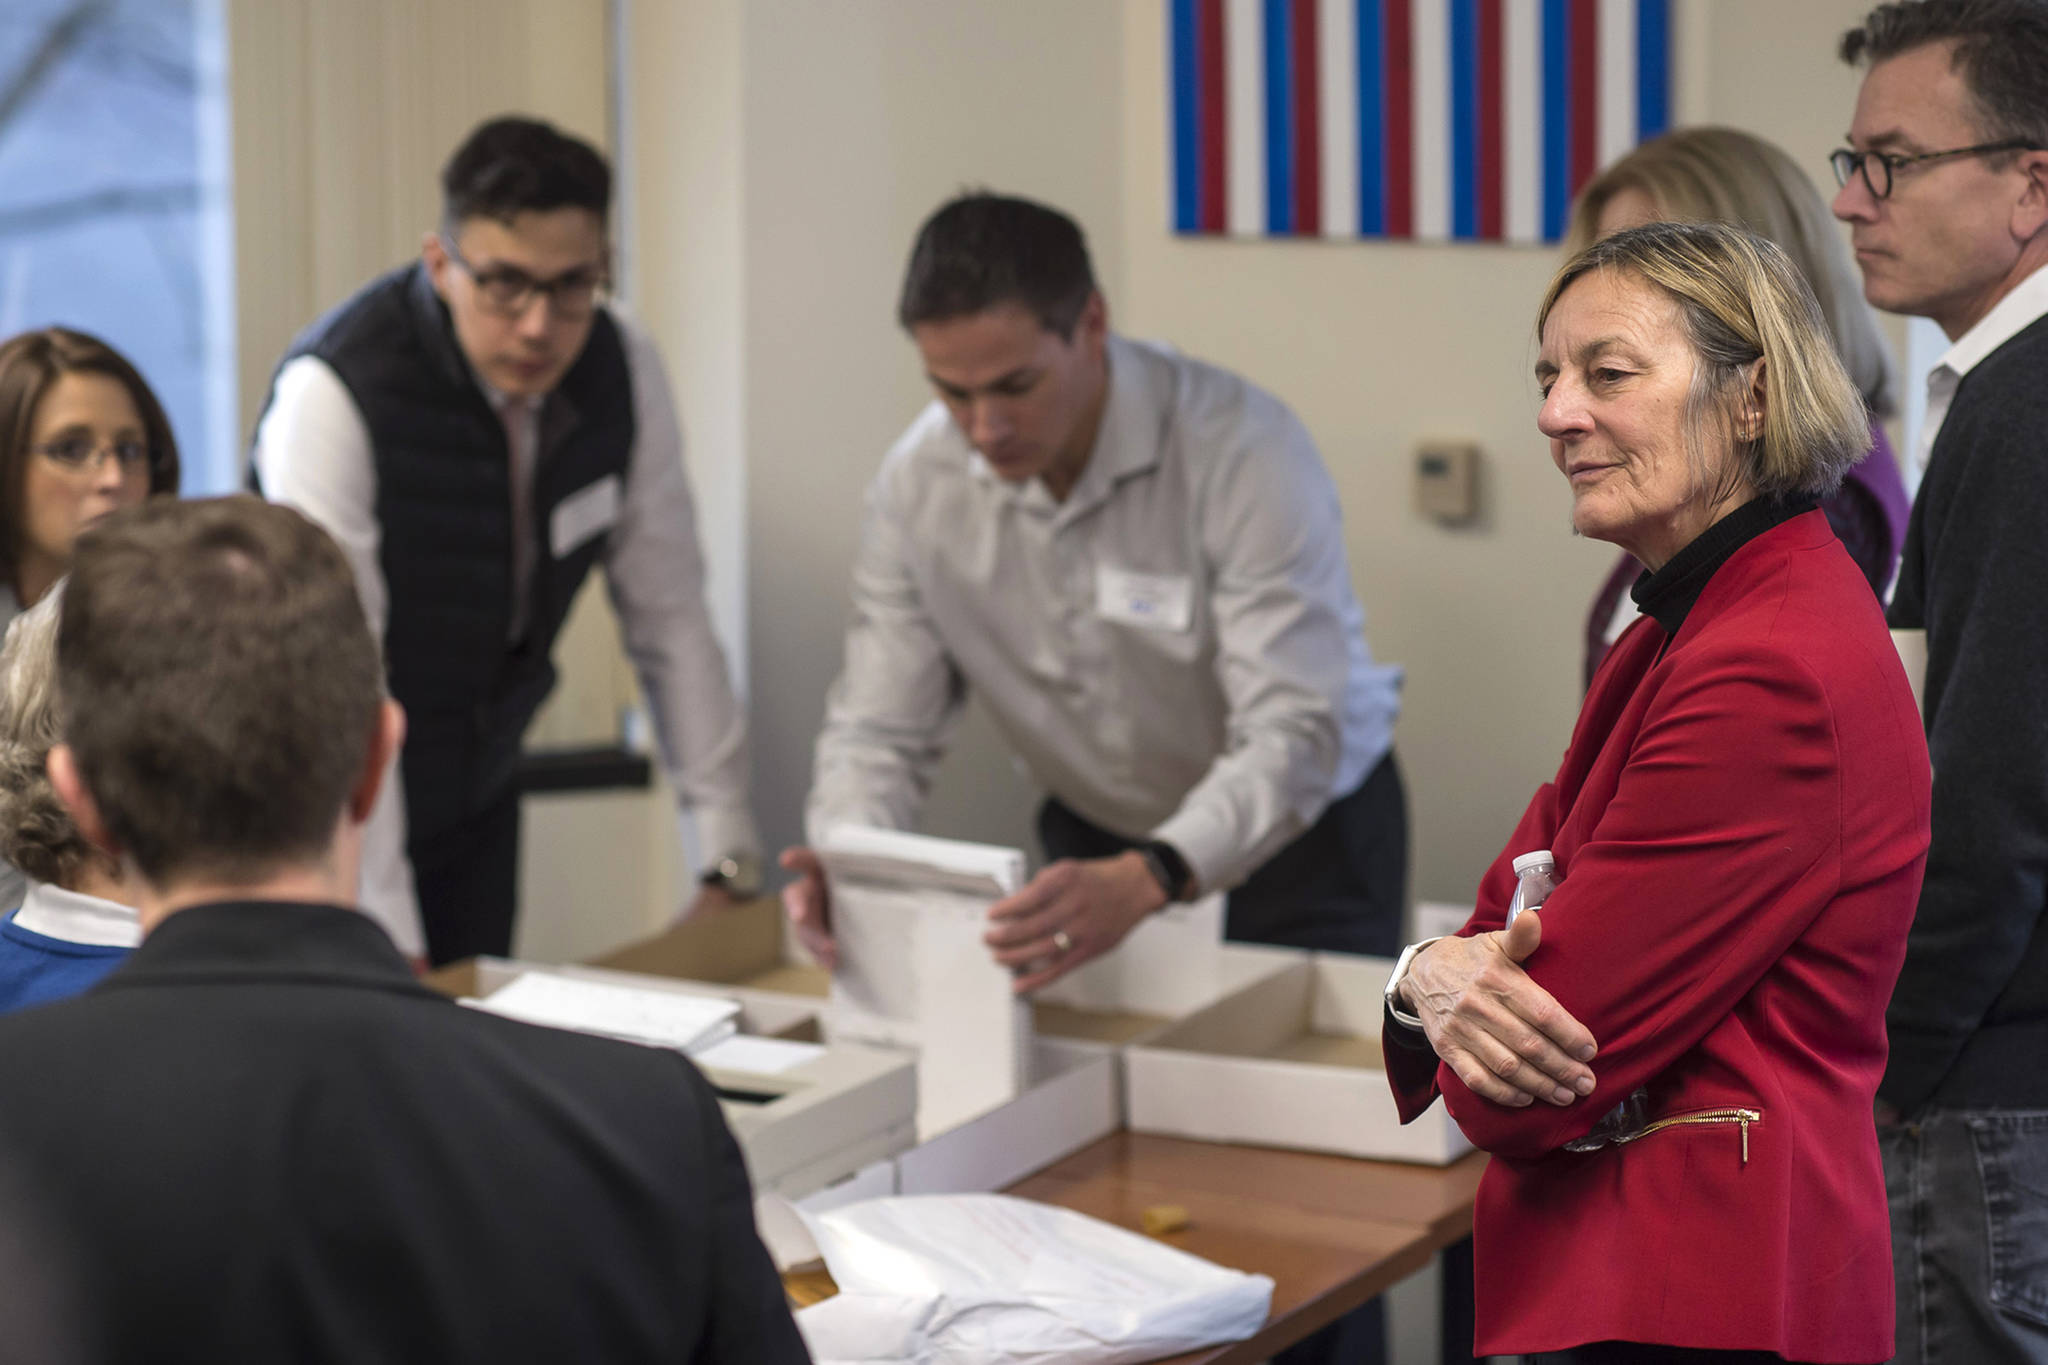 In this Nov. 30, 2018 photo, Alaska House District 1 candidate Democrat Kathryn Dodge, right, watches the election recount at the Department of Elections’ Juneau, Alaska office. The Democrat who lost a recount by one vote in a contested Alaska House race must decide by Wednesday whether to challenge the results. Kathryn Dodge, in a statement late Tuesday, Dec. 4, 2018, says she and her team were reviewing decisions made by the Division of Elections. She says she disagrees with some of the decisions but wants to “look at everything” before making a final decision. (Michael Penn | Juneau Empire)